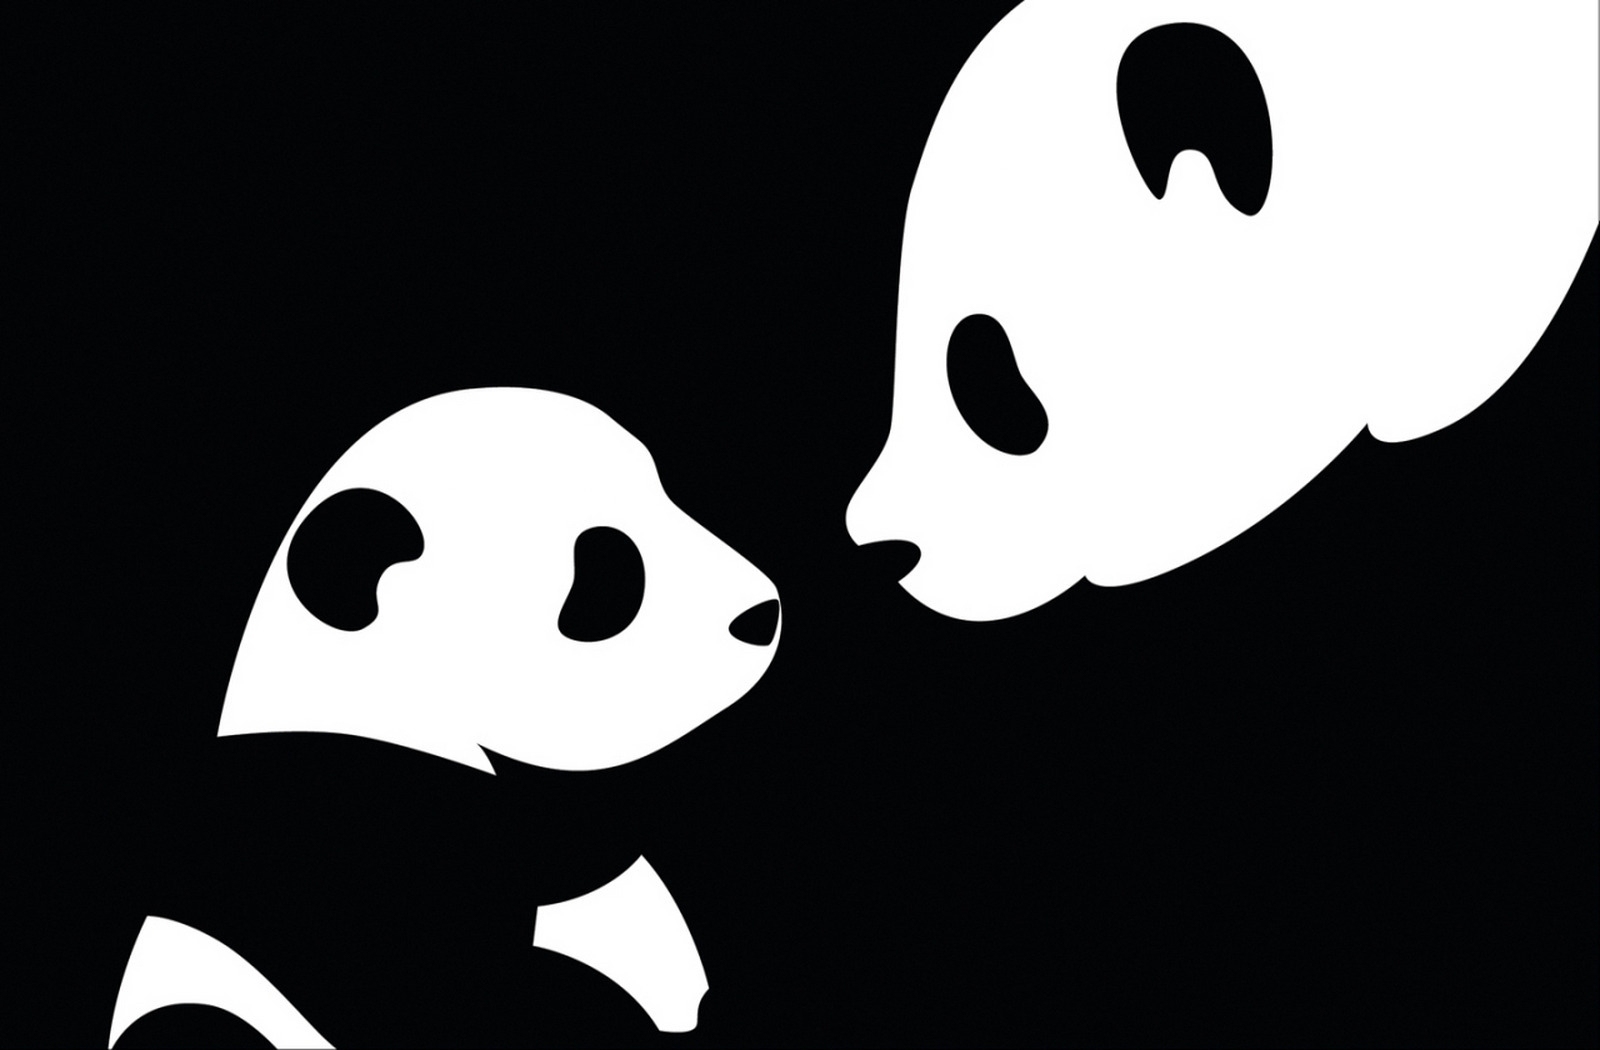 panda, picture, vector, drawing, black, white